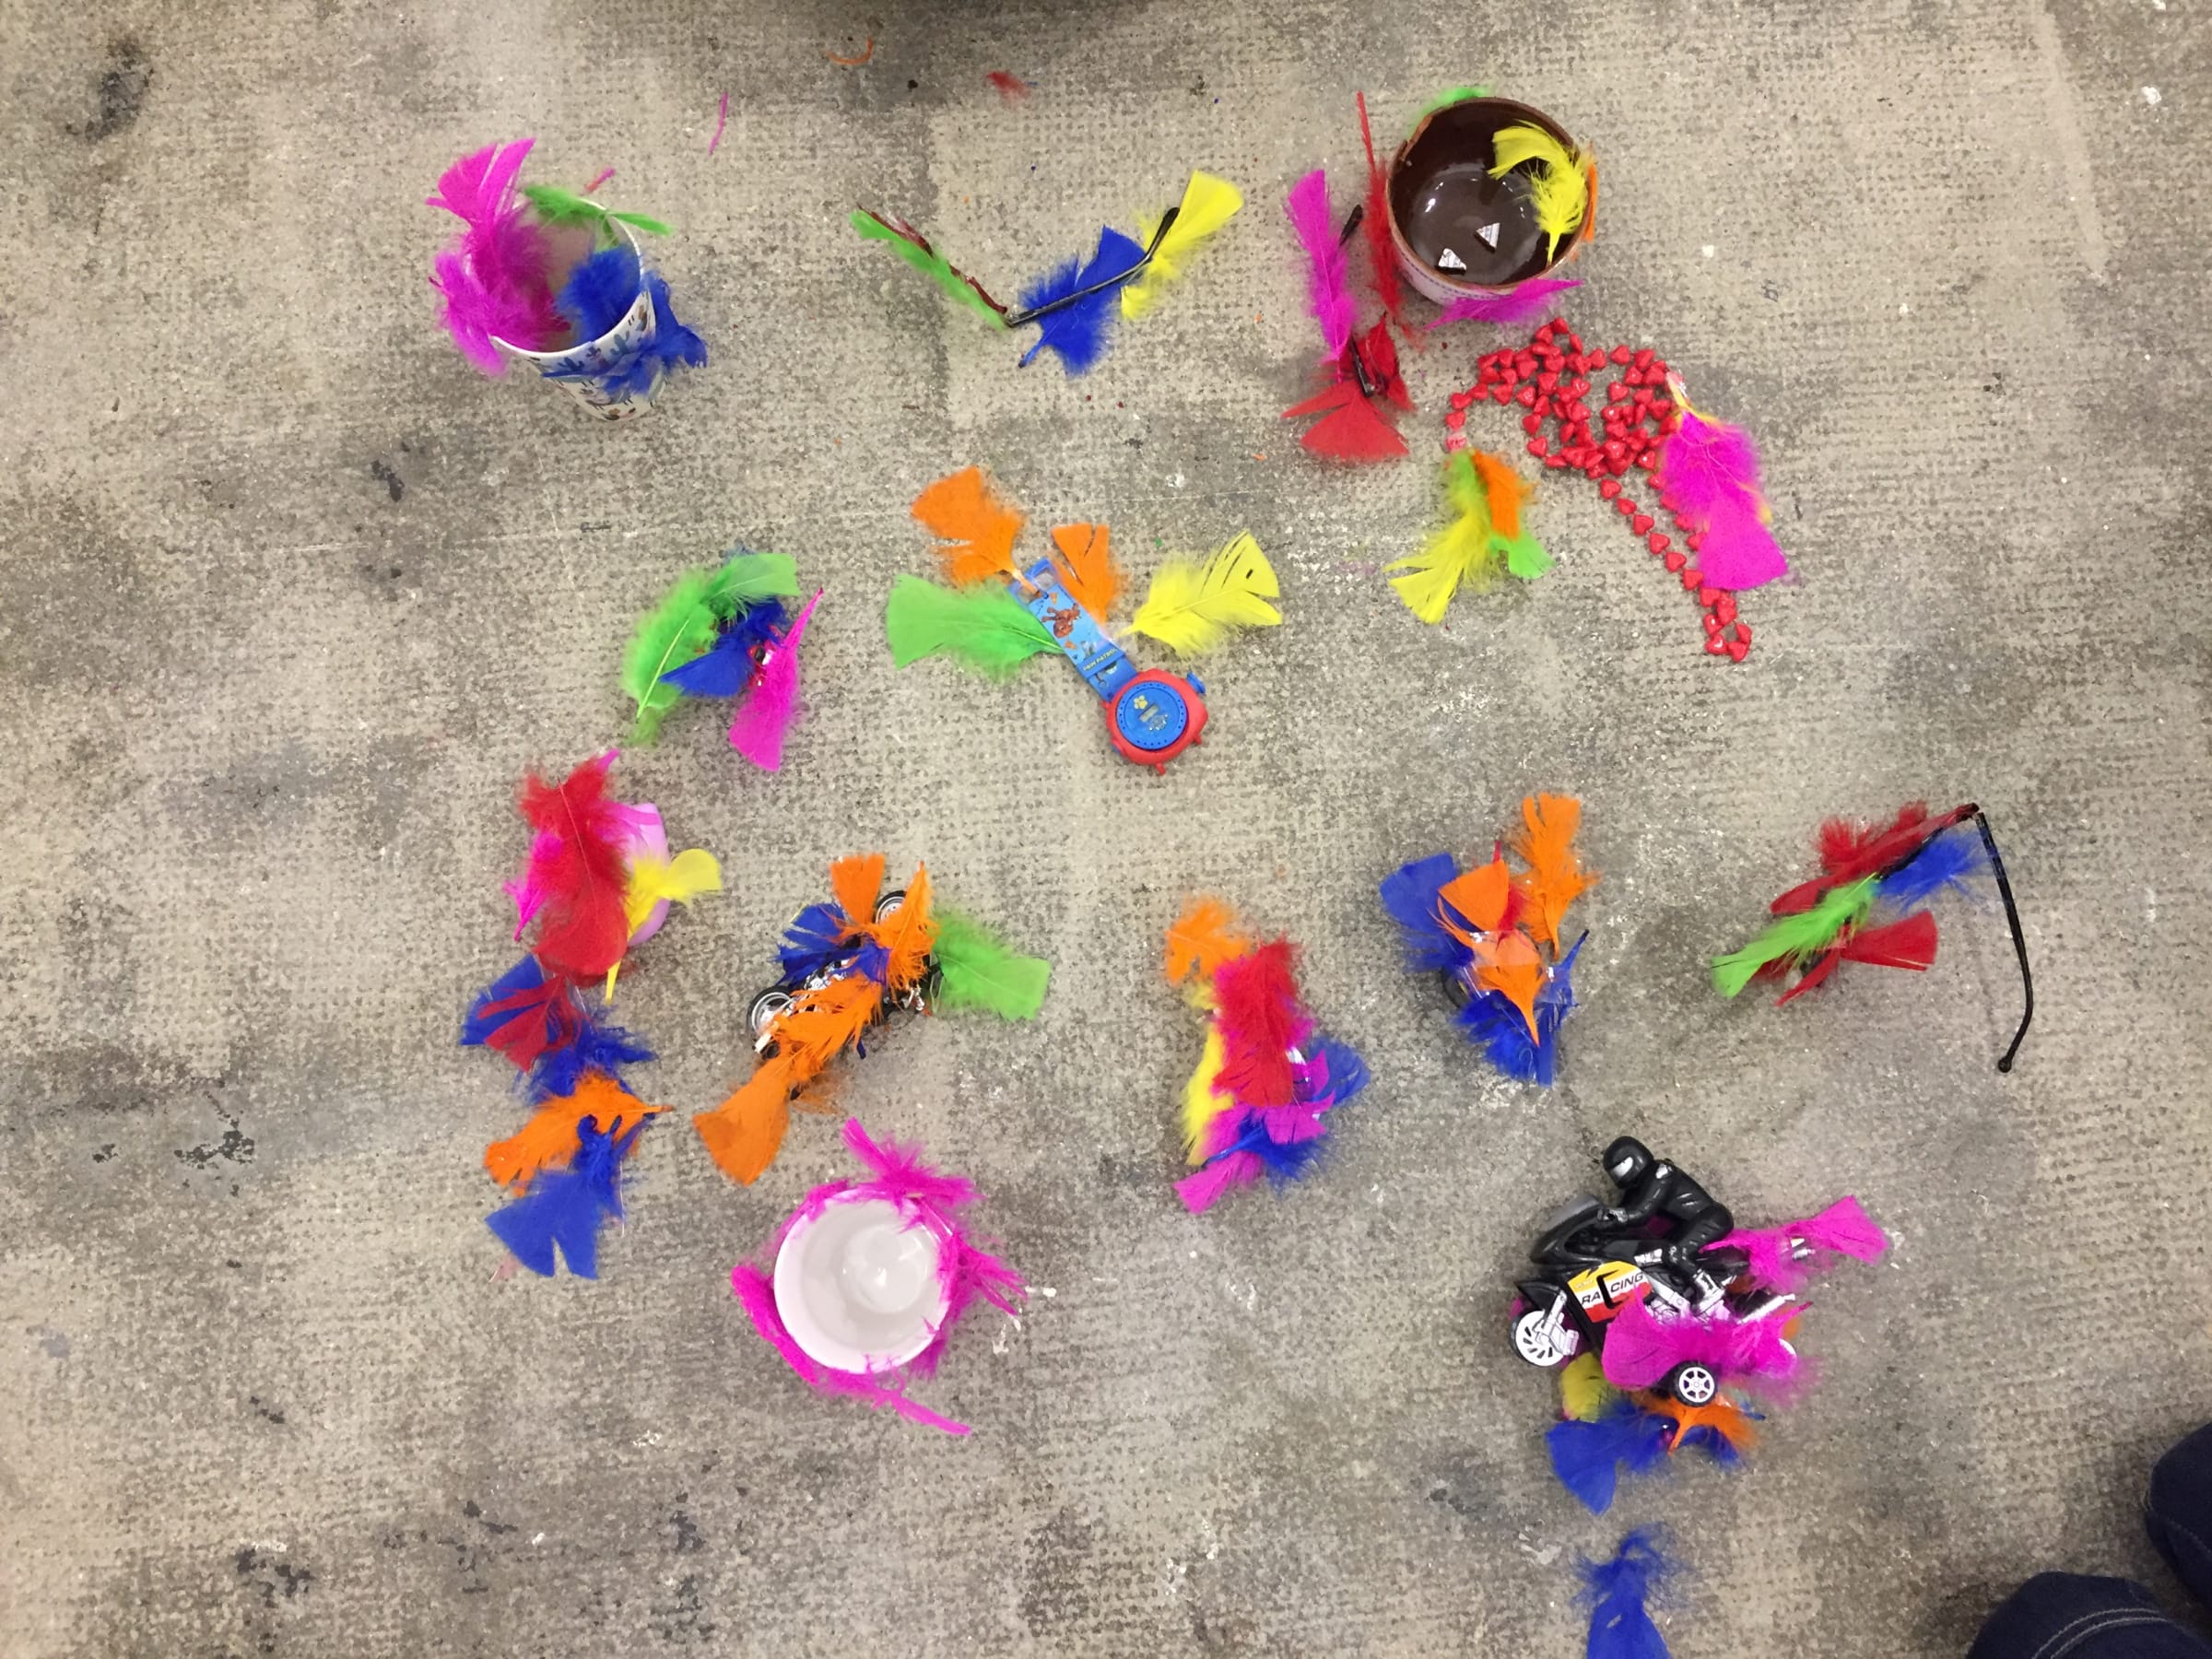 crafts created by Kids visiting Marian Goodman Gallery in Paris 